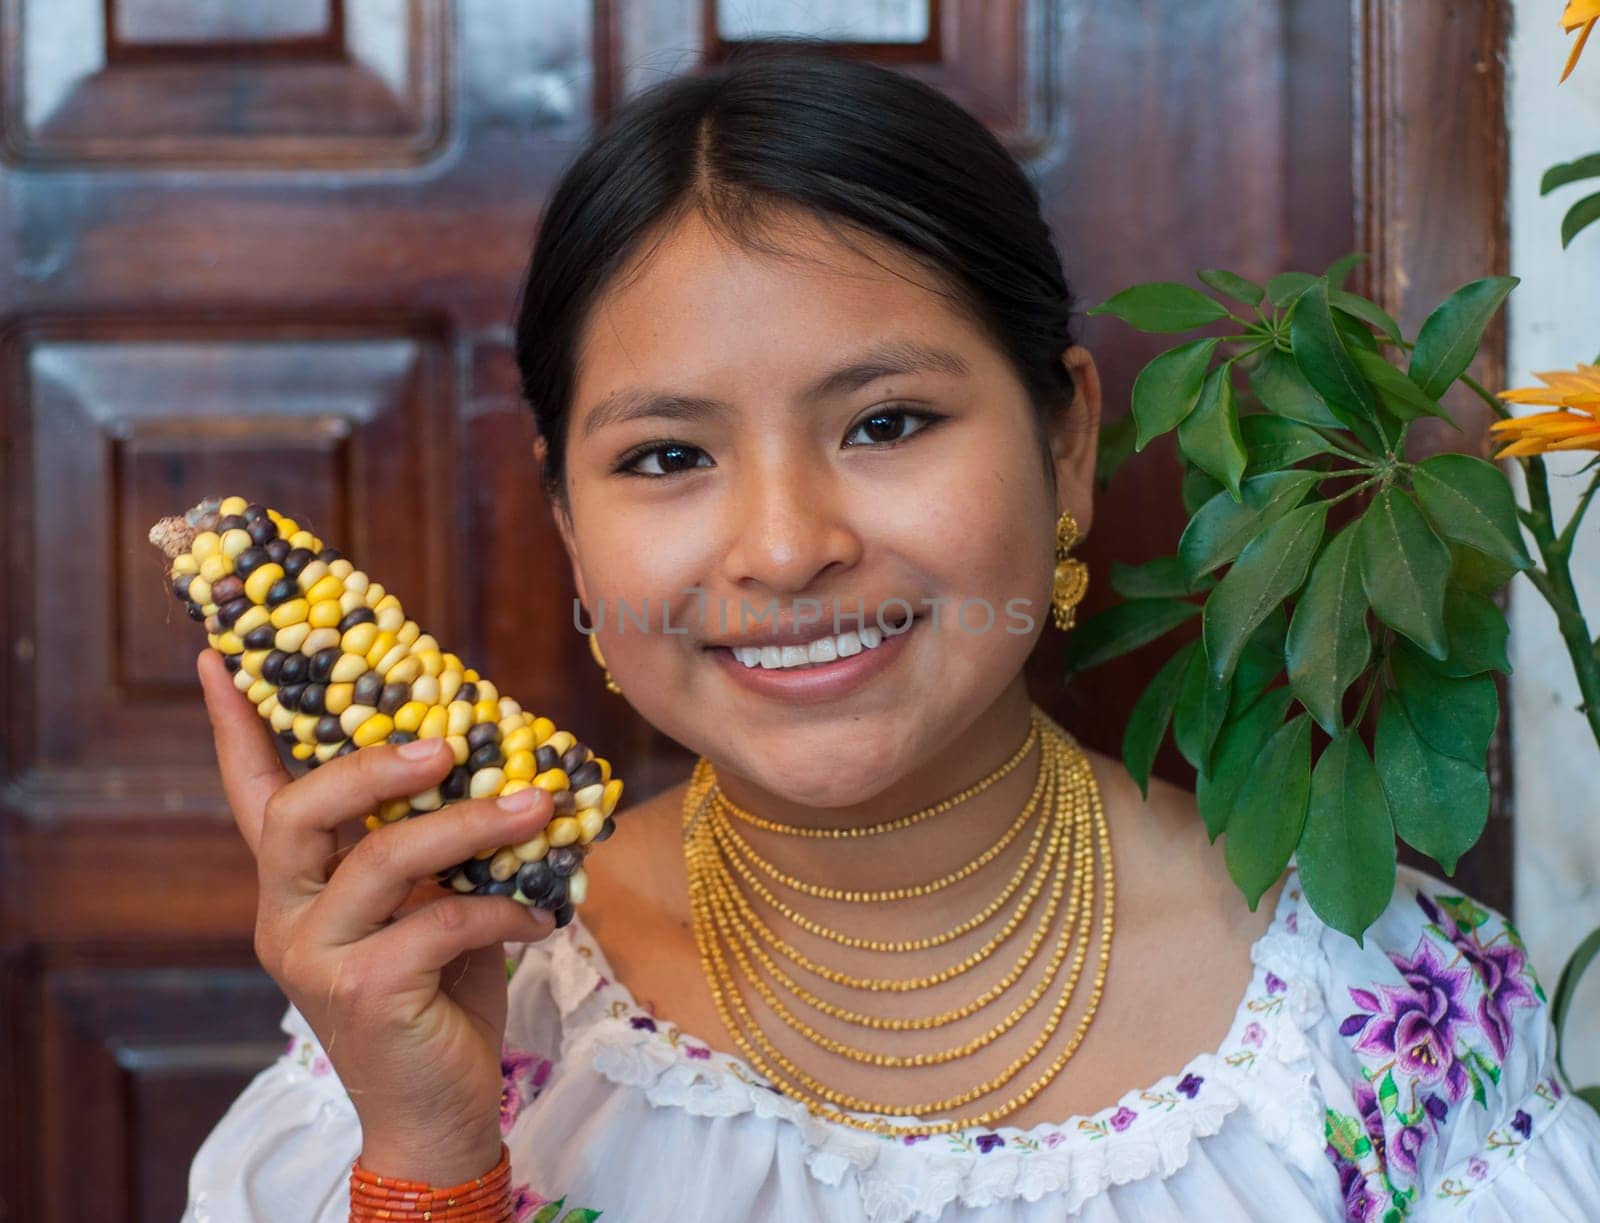 closeup of a beautiful young indigenous woman smiling at the camera with a sweet look while holding an ear of corn in her hand. High quality photo